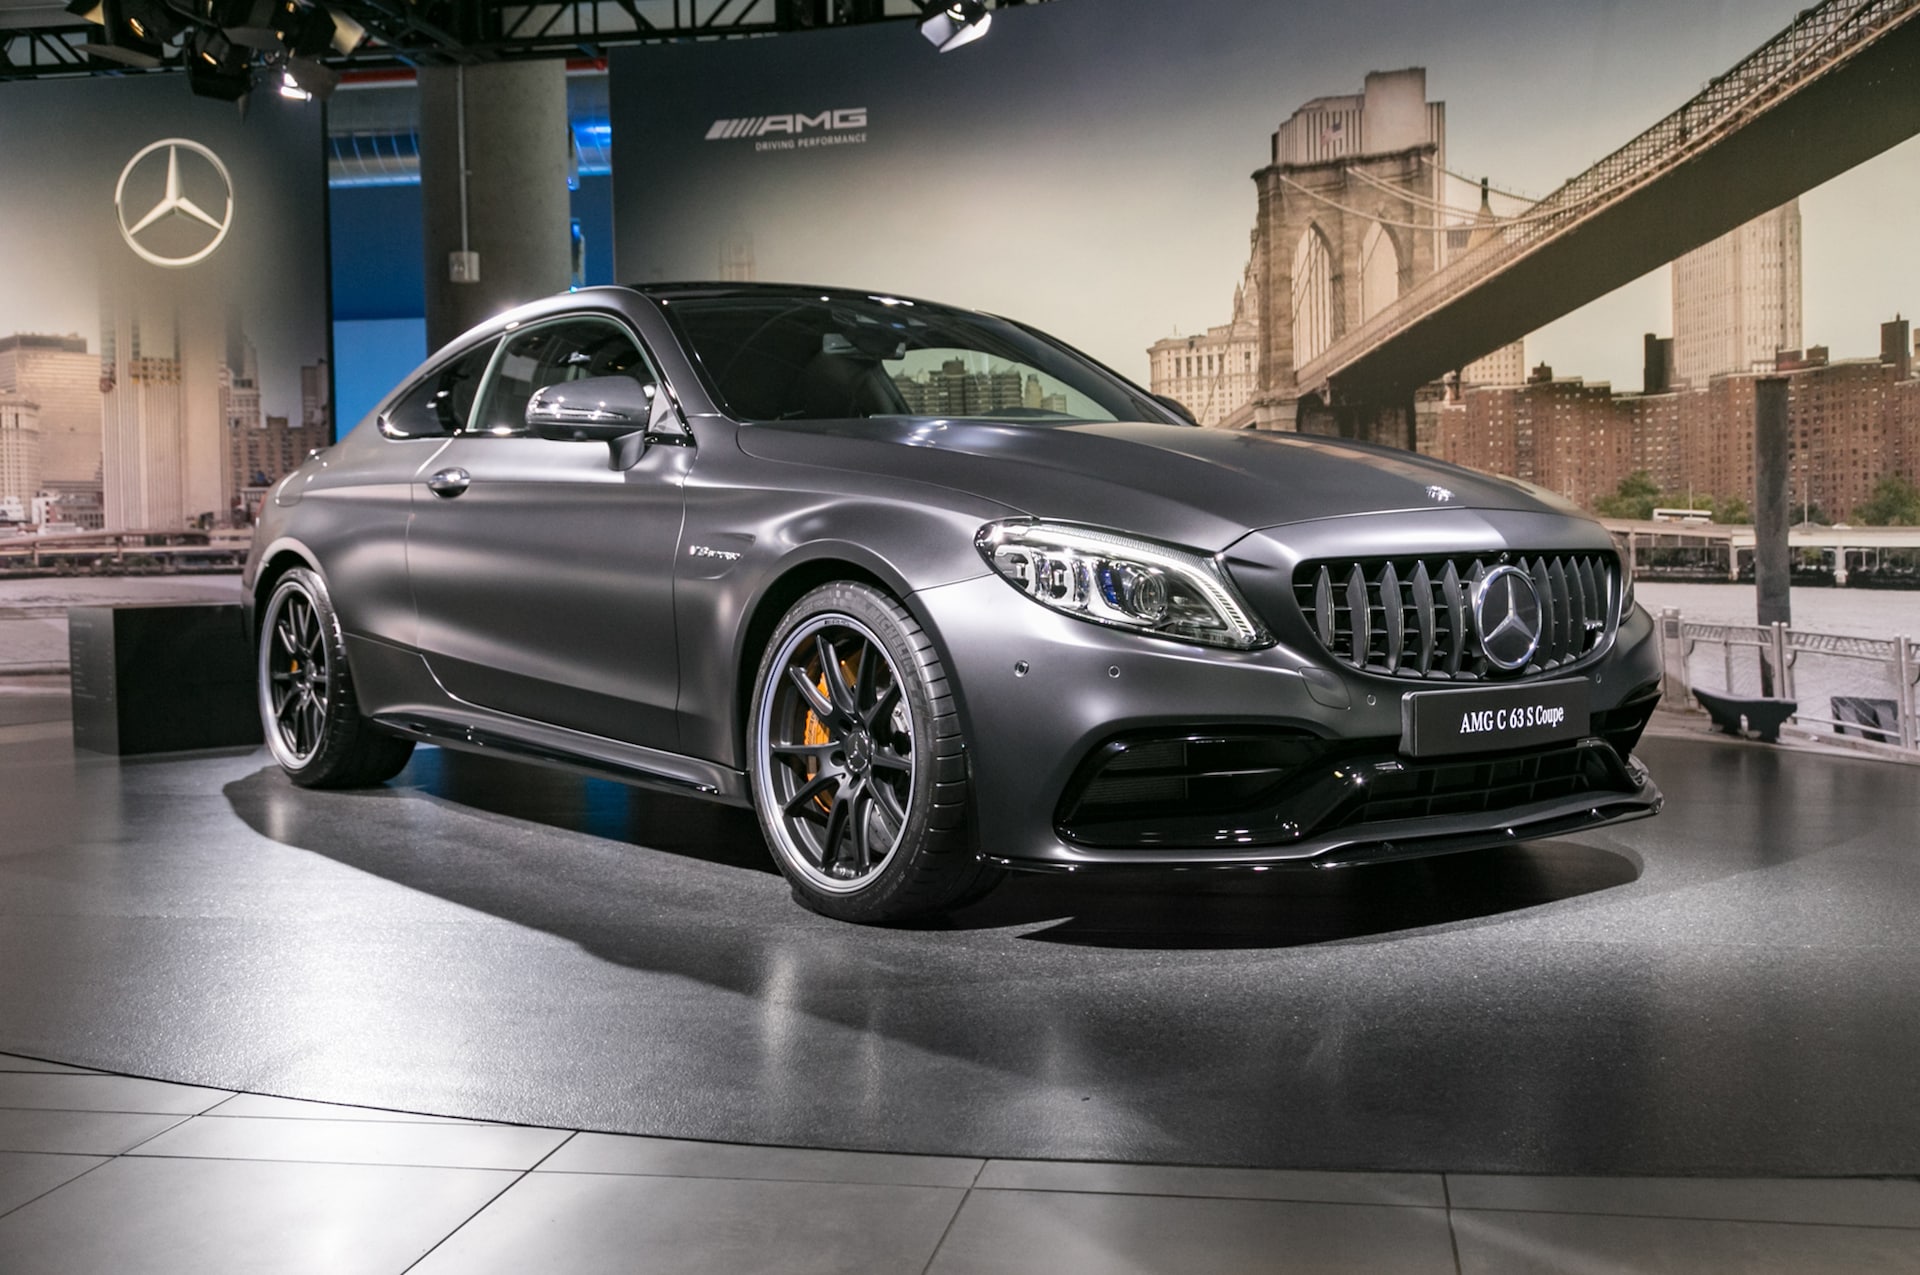 2019 Mercedes-AMG C63 Family Arrives with Six Variants